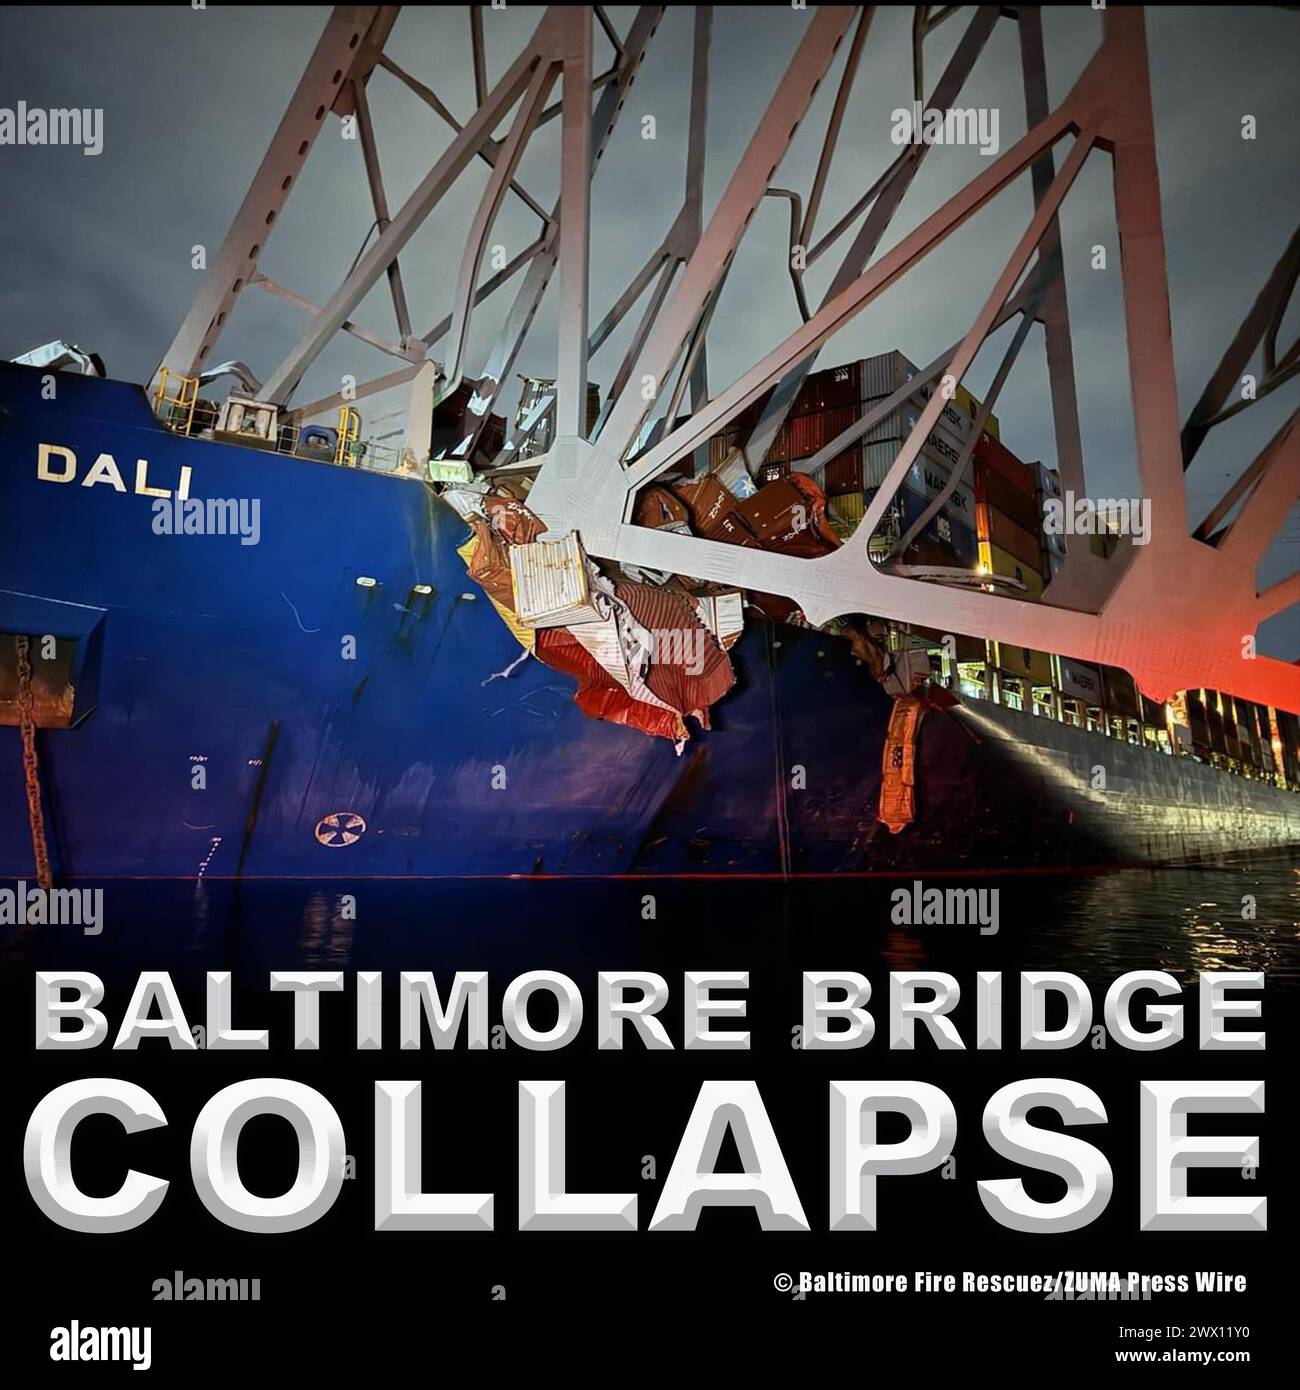 March 26, 2024, Baltimore, Maryland, USA: A close up view captured immediately after the Dali cargo vessel crashed into the Francis Scott Key Bridge in Baltimore, taken by Baltimore City Fire Rescue 1 during search and rescue operations. Six people are unaccounted for following the collapse. Eight people were on the bridge when the cargo ship hit, two of them were saved from the water. The crew on the ship issued a ''mayday'' call before the accident. The bridge extends over the Patapsco River and is an essential link of Interstate-695, or the Baltimore Beltway. The Baltimore's Francis Scott K Stock Photo